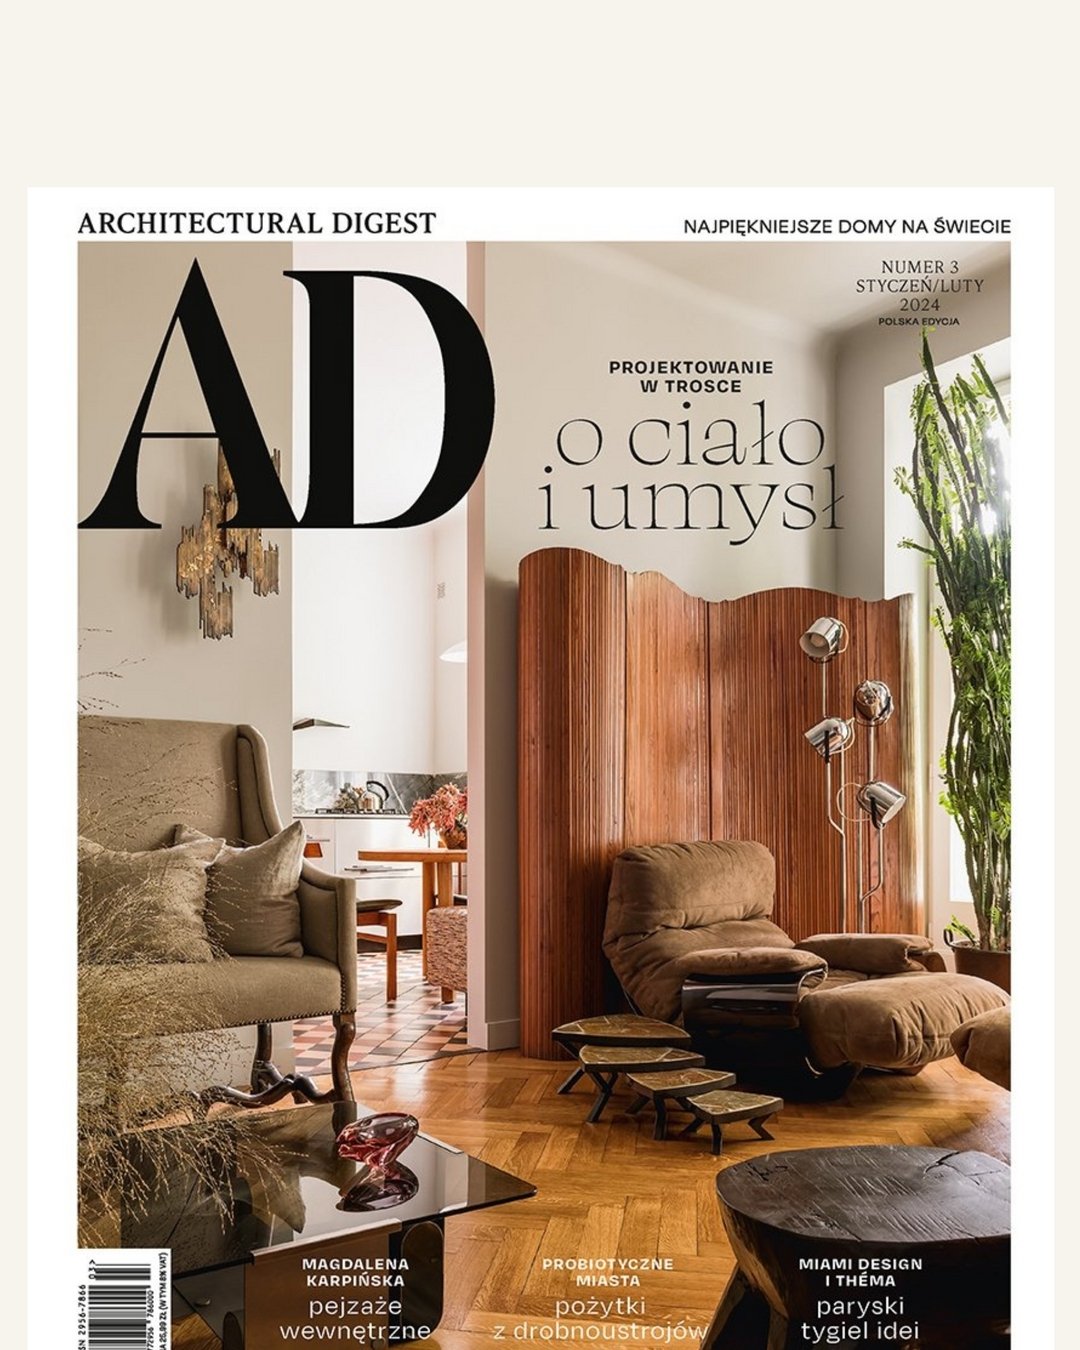 Recent press: our Artful &amp; Glamorous project for @archdigestpolska, courtesy of @designmedia_paris.

We approached this project with the core belief: your home should always reflect the vibrant, ever-evolving trajectory of your life.

After 15 ye